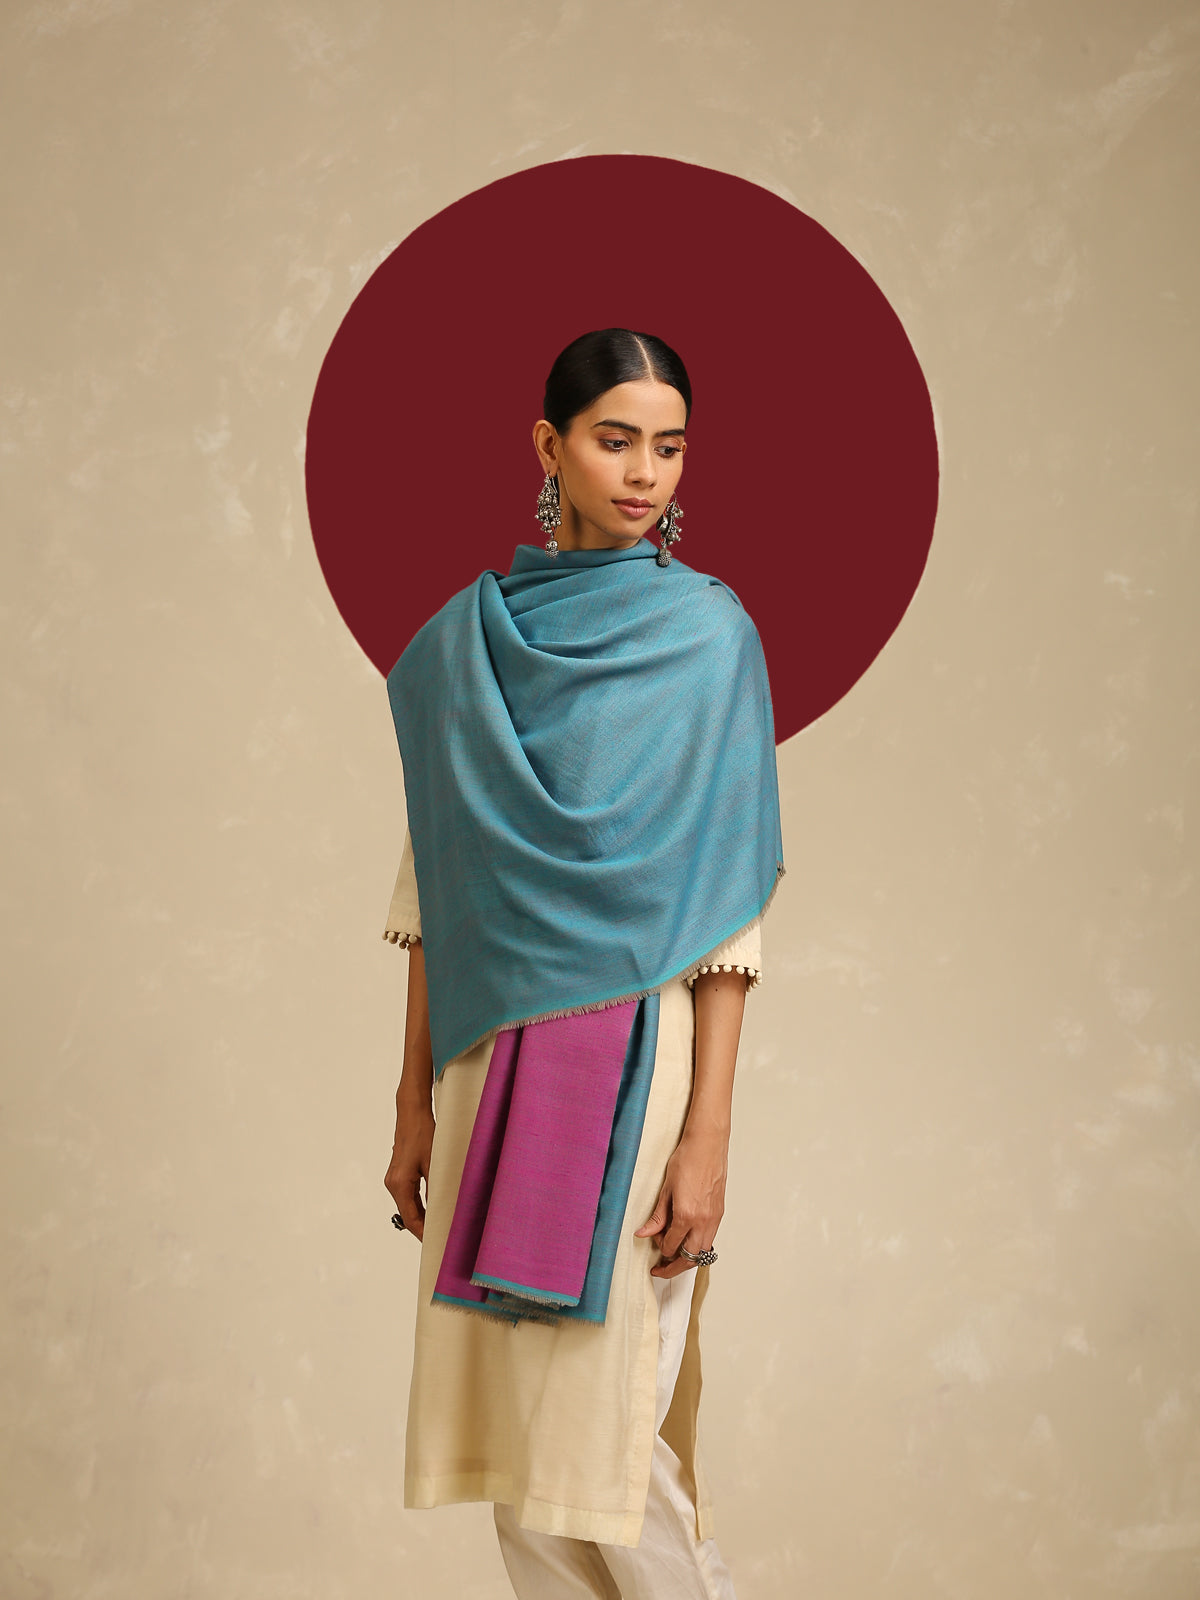 Model is wearing pashmina reversible shawl in pink with blue at the back.